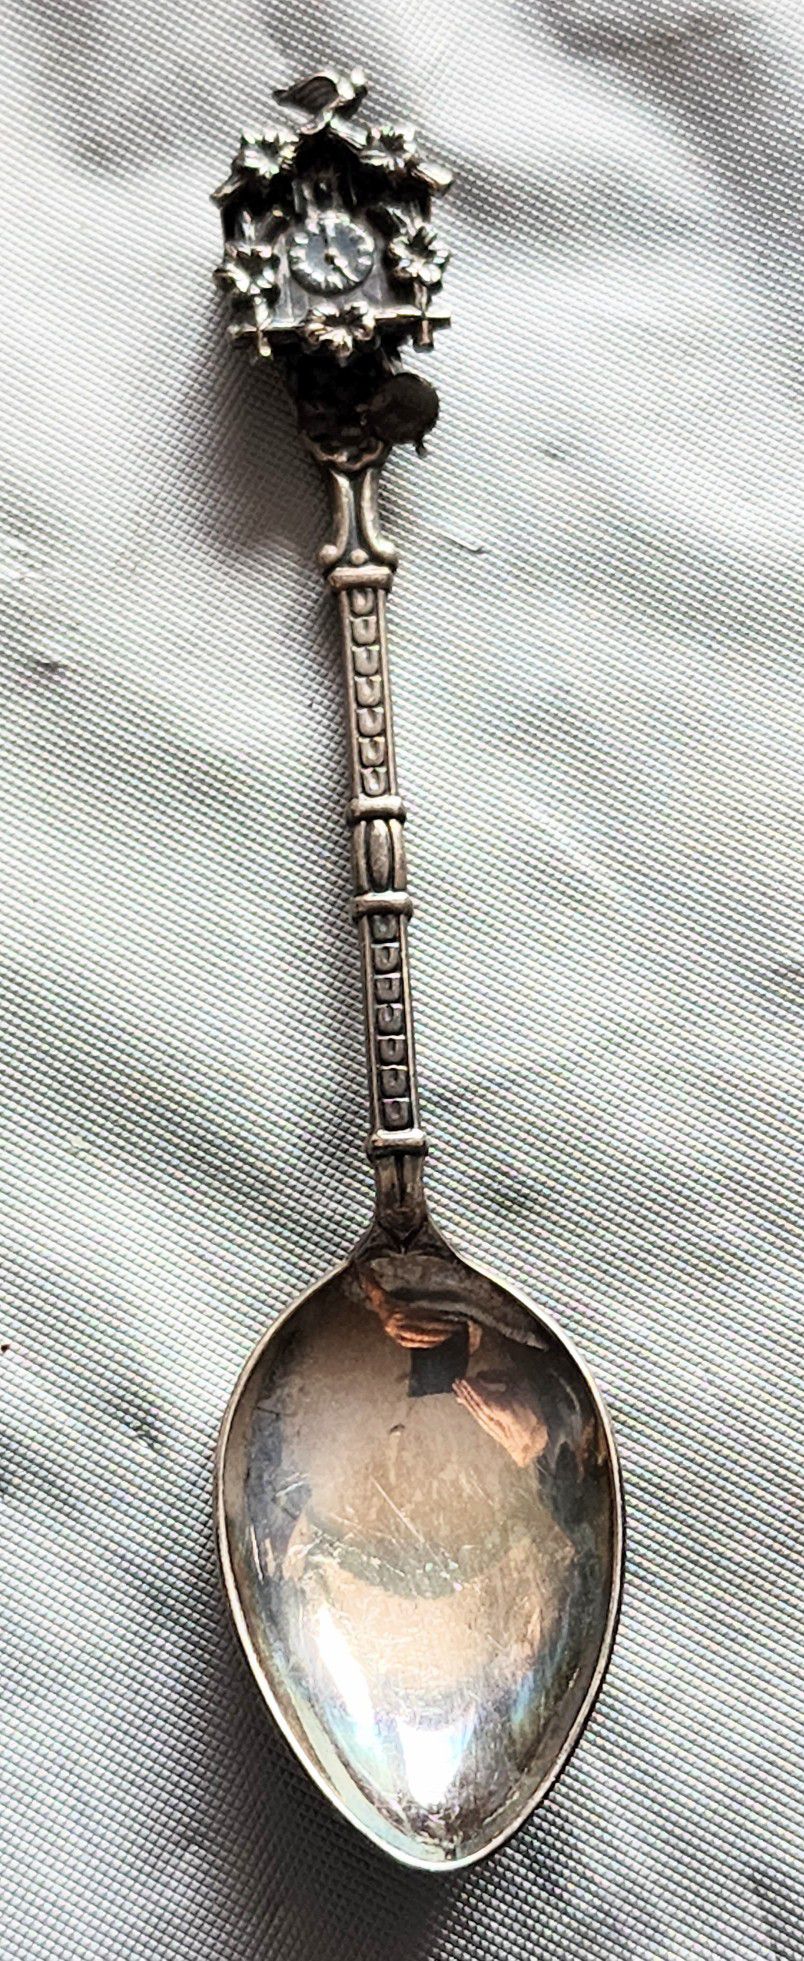 Vintage Beautiful Articulated Cuckoo Clock Collectible Spoon

